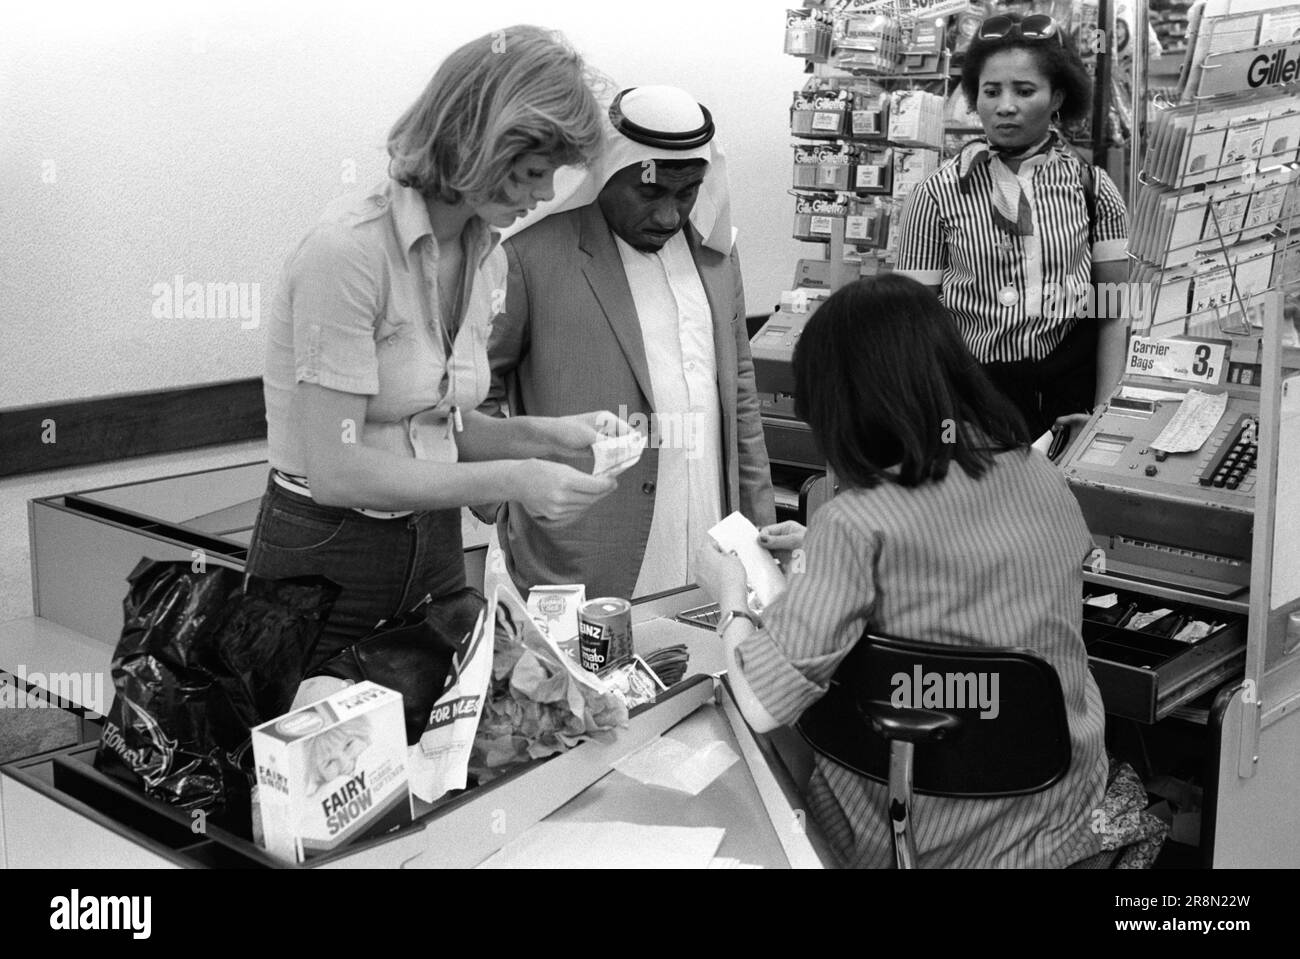 Poor Arabs in London 1970s Shopping. Middle Eastern people came to Britain for subsidised healthcare in Harley Street clinics. They mainly stayed in cheap hotels in Earls Court. Arab man Earls Court supermarket  two check out women help him with shopping and paying the bill. Earls Court, London, England circa 1977. 70s UK HOMER SYKES Stock Photo